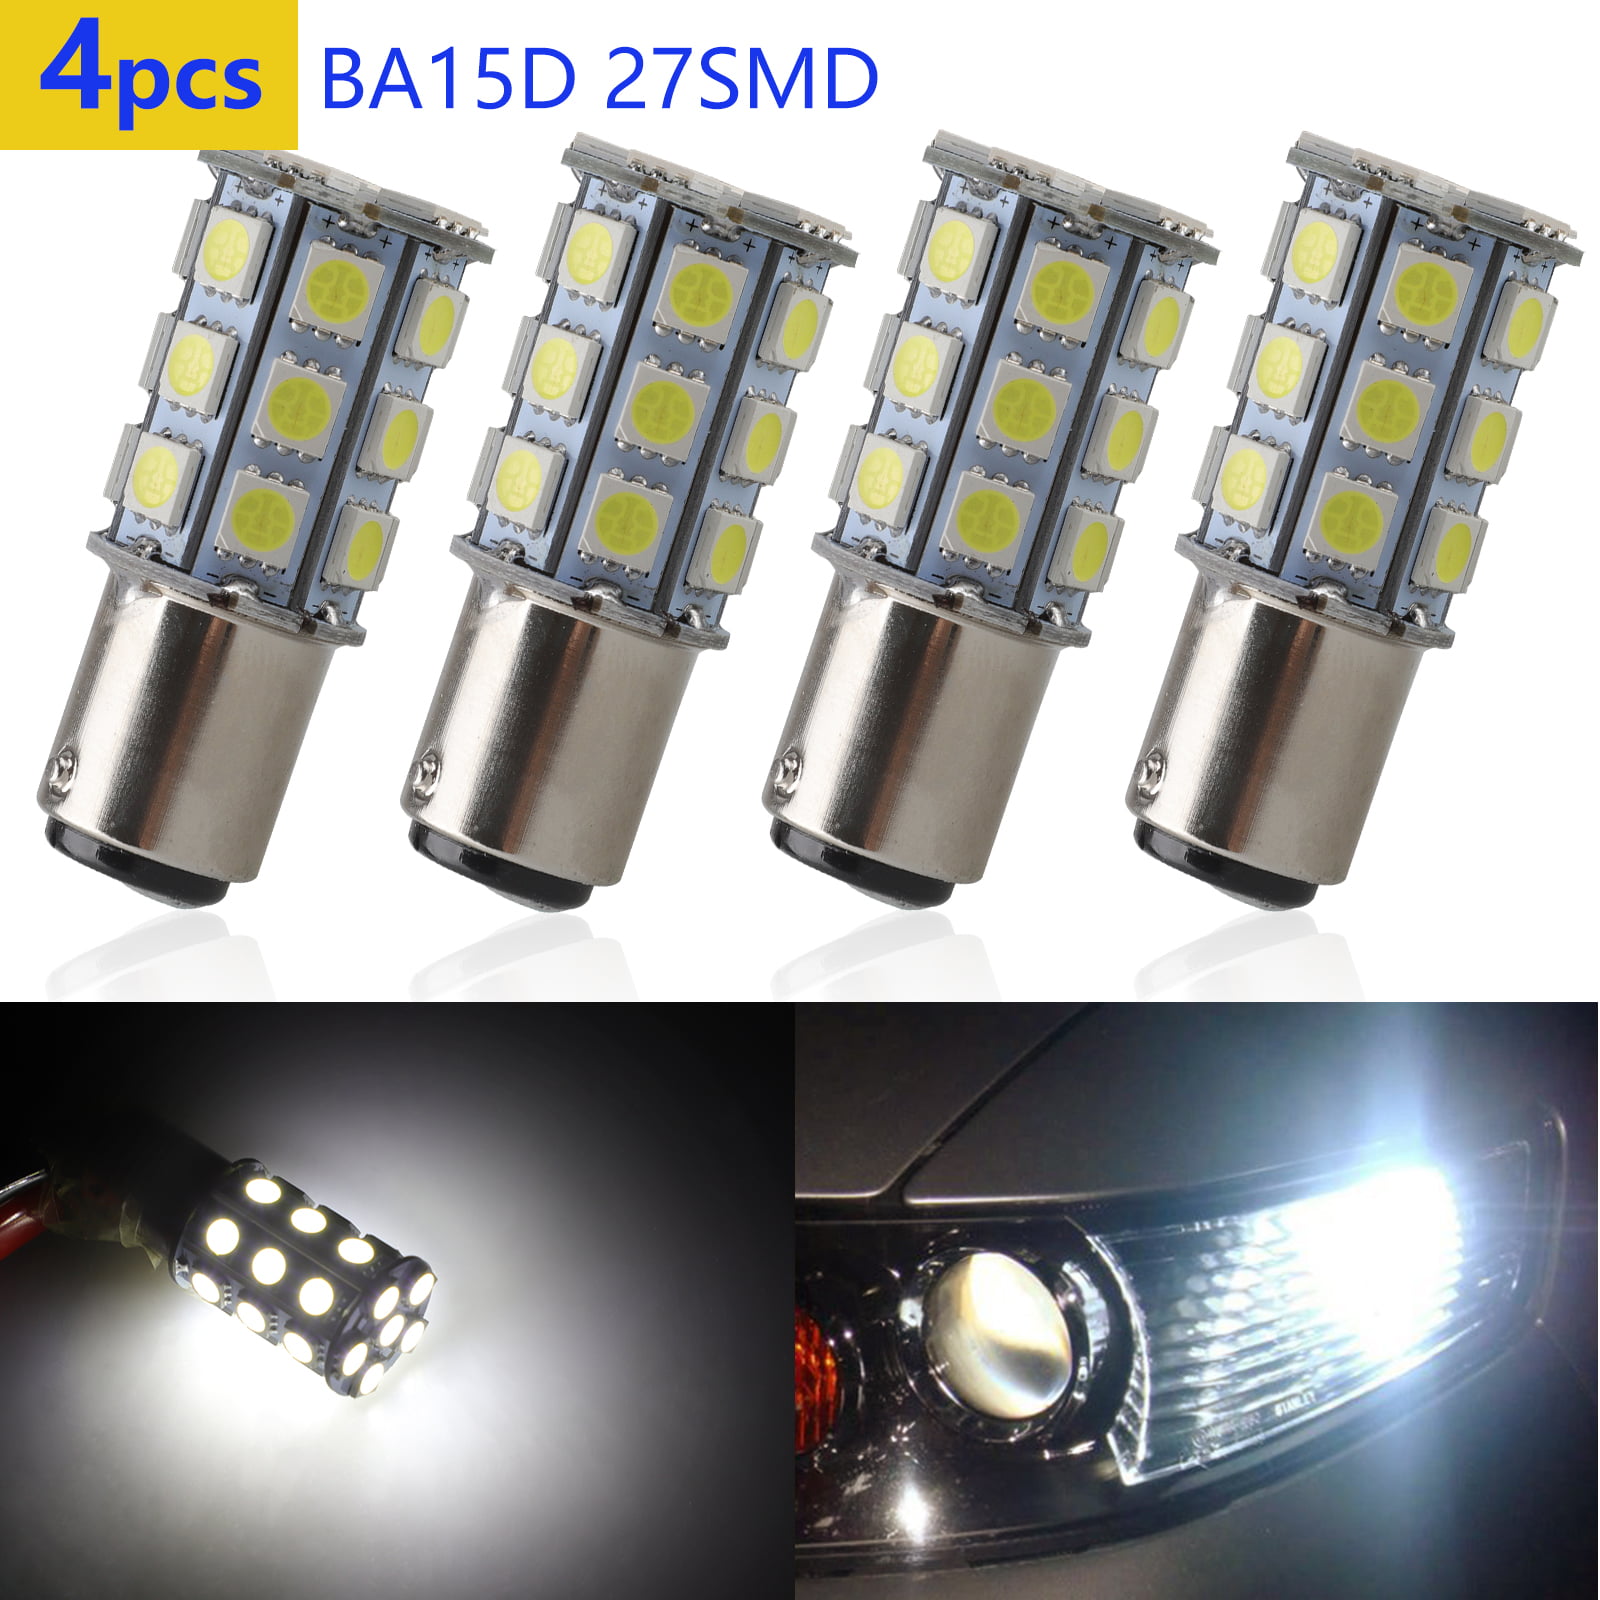 4-Pack Daylight White 6000K 40W Halogen Equivalent AC/DC12V BA15D LED Bulb 1157 1076 1130 1176 1142 Double Contact Bayonet Dimmable for RV Trailer Camper Motor Home Marine Boat Landscape Bulb 4W 